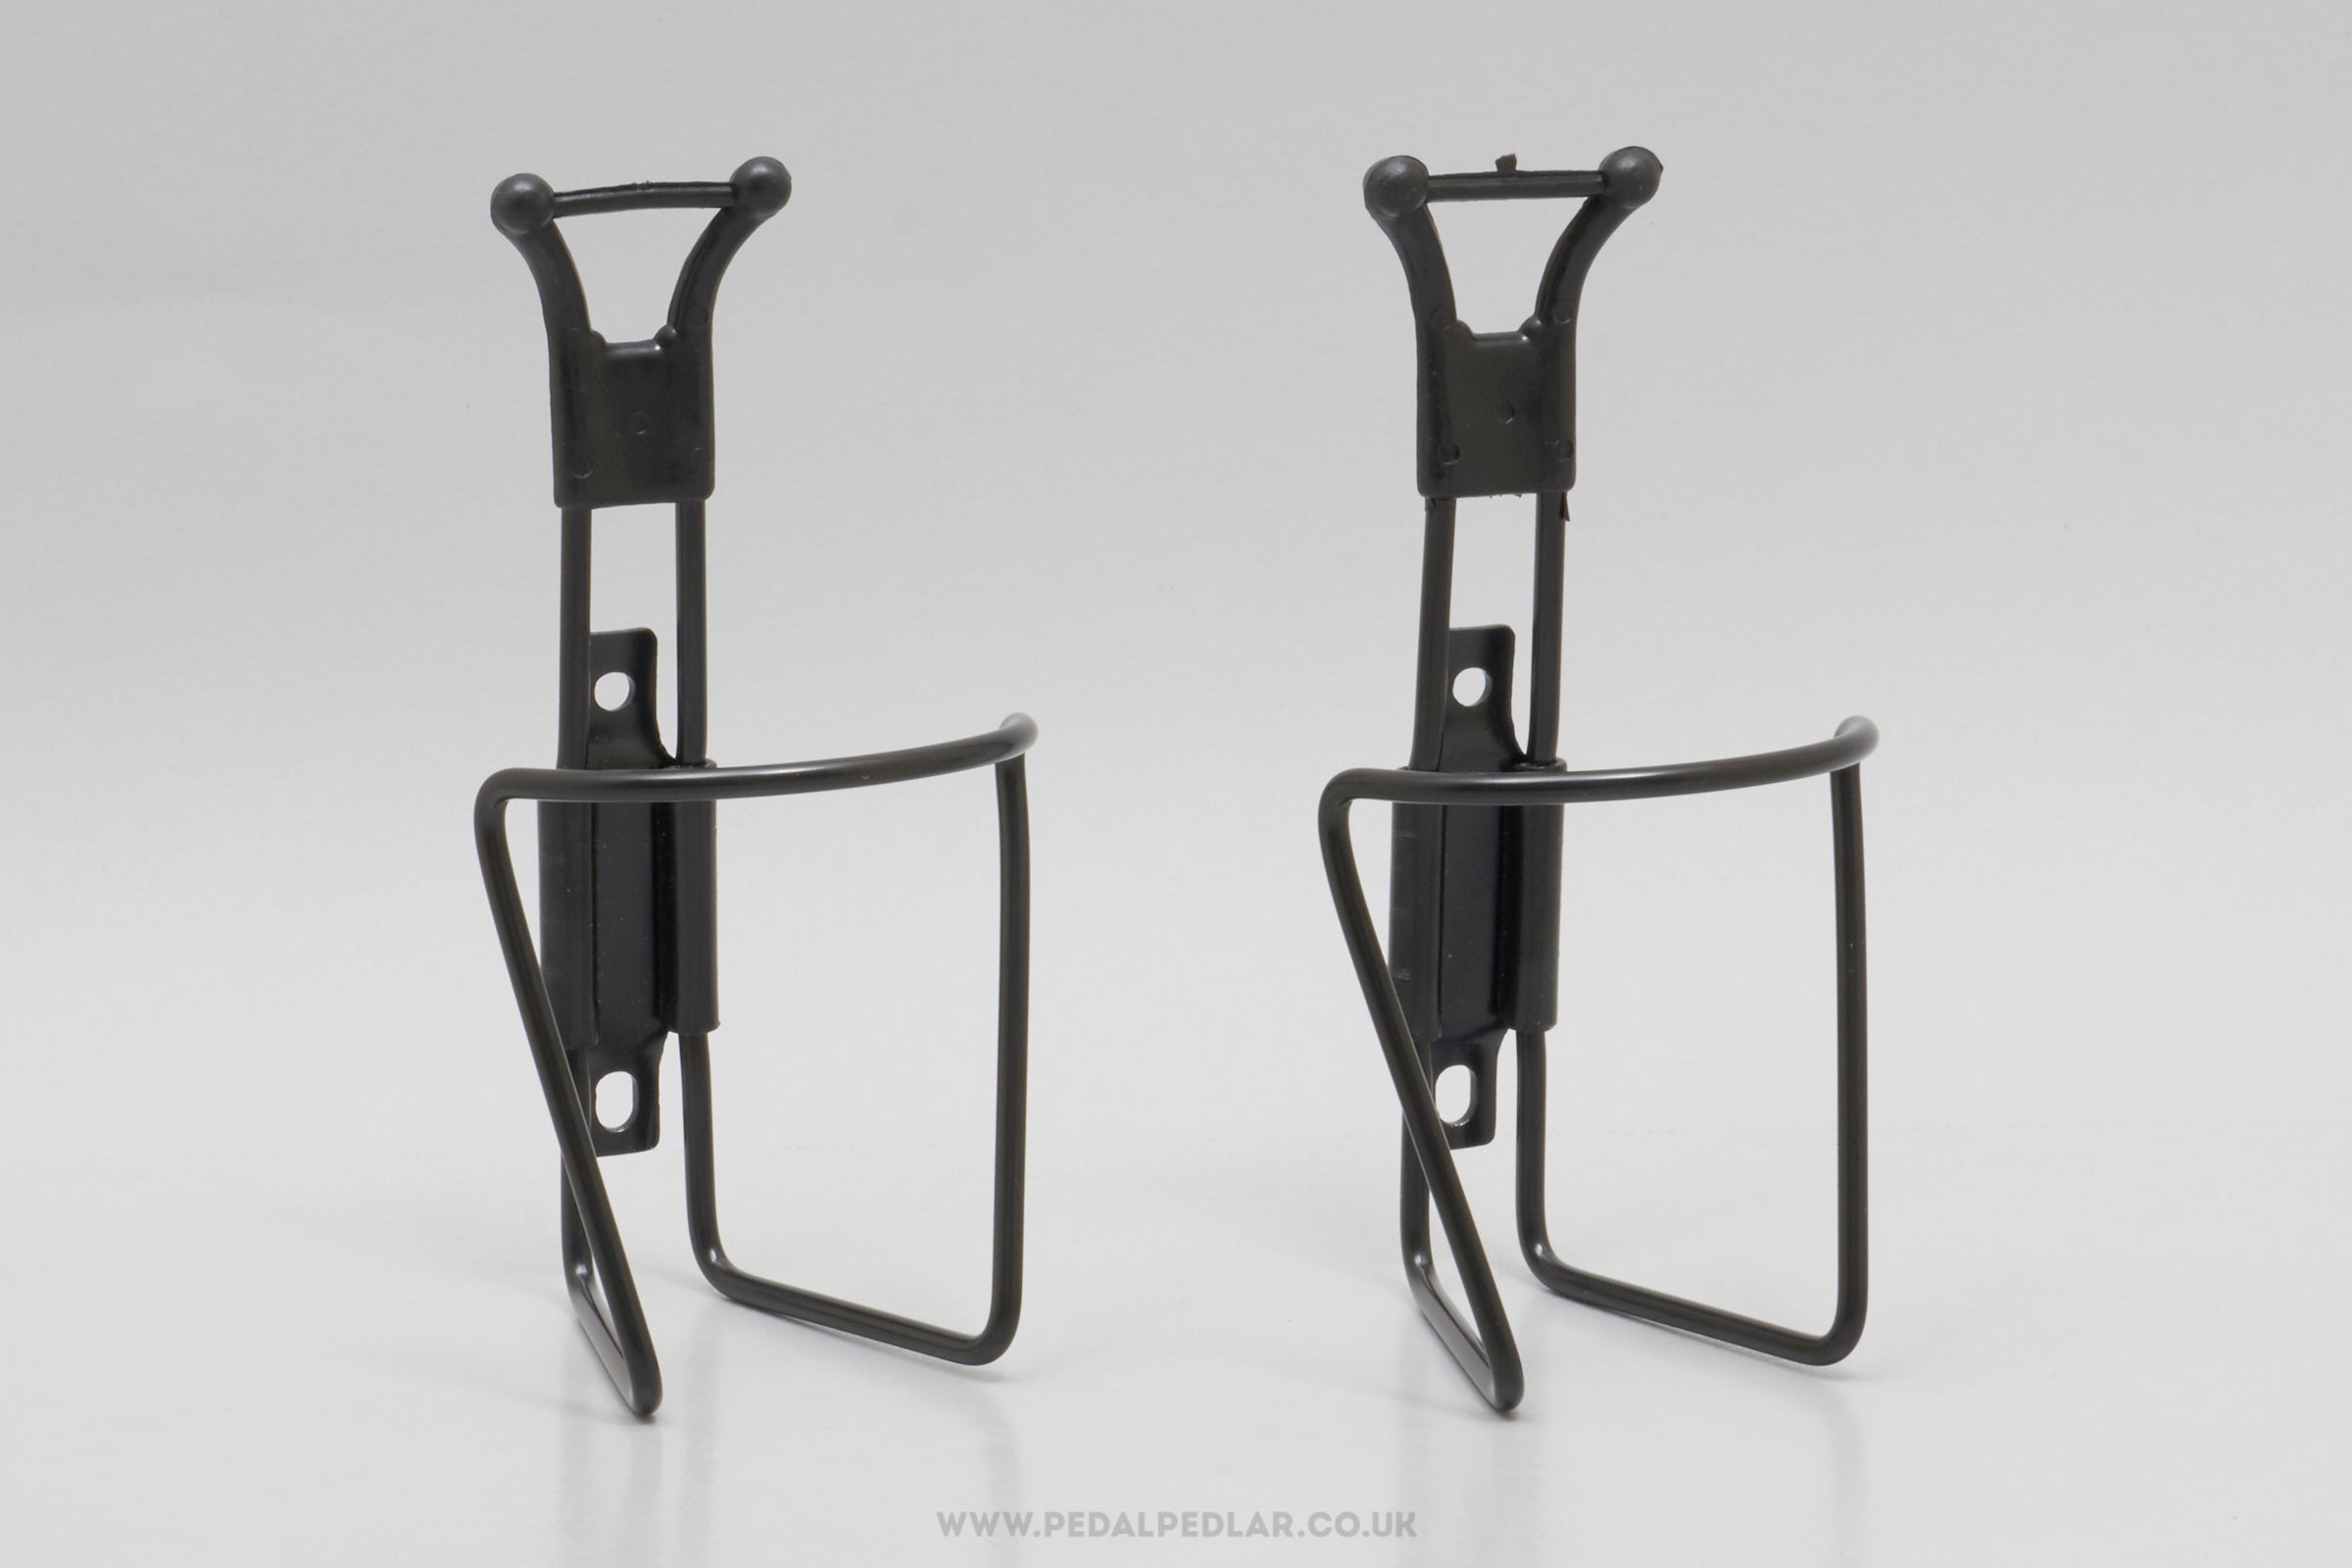 Vintage TA Style NOS Black Bottle Cages - Pedal Pedlar - Buy New Old Stock Cycle Accessories